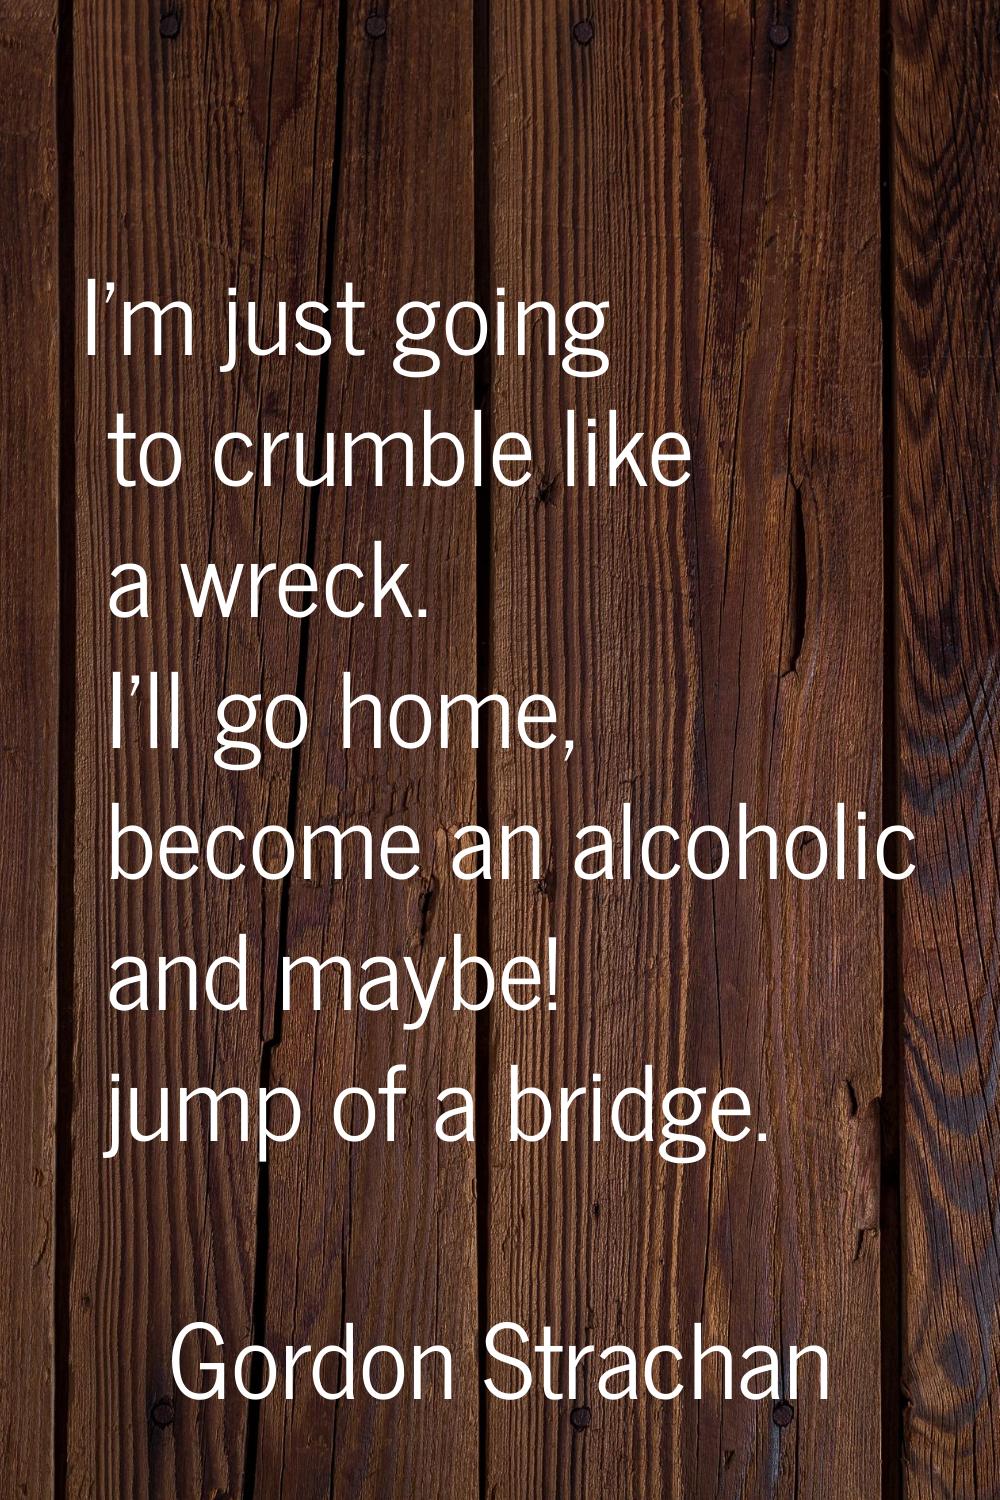 I'm just going to crumble like a wreck. I'll go home, become an alcoholic and maybe! jump of a brid